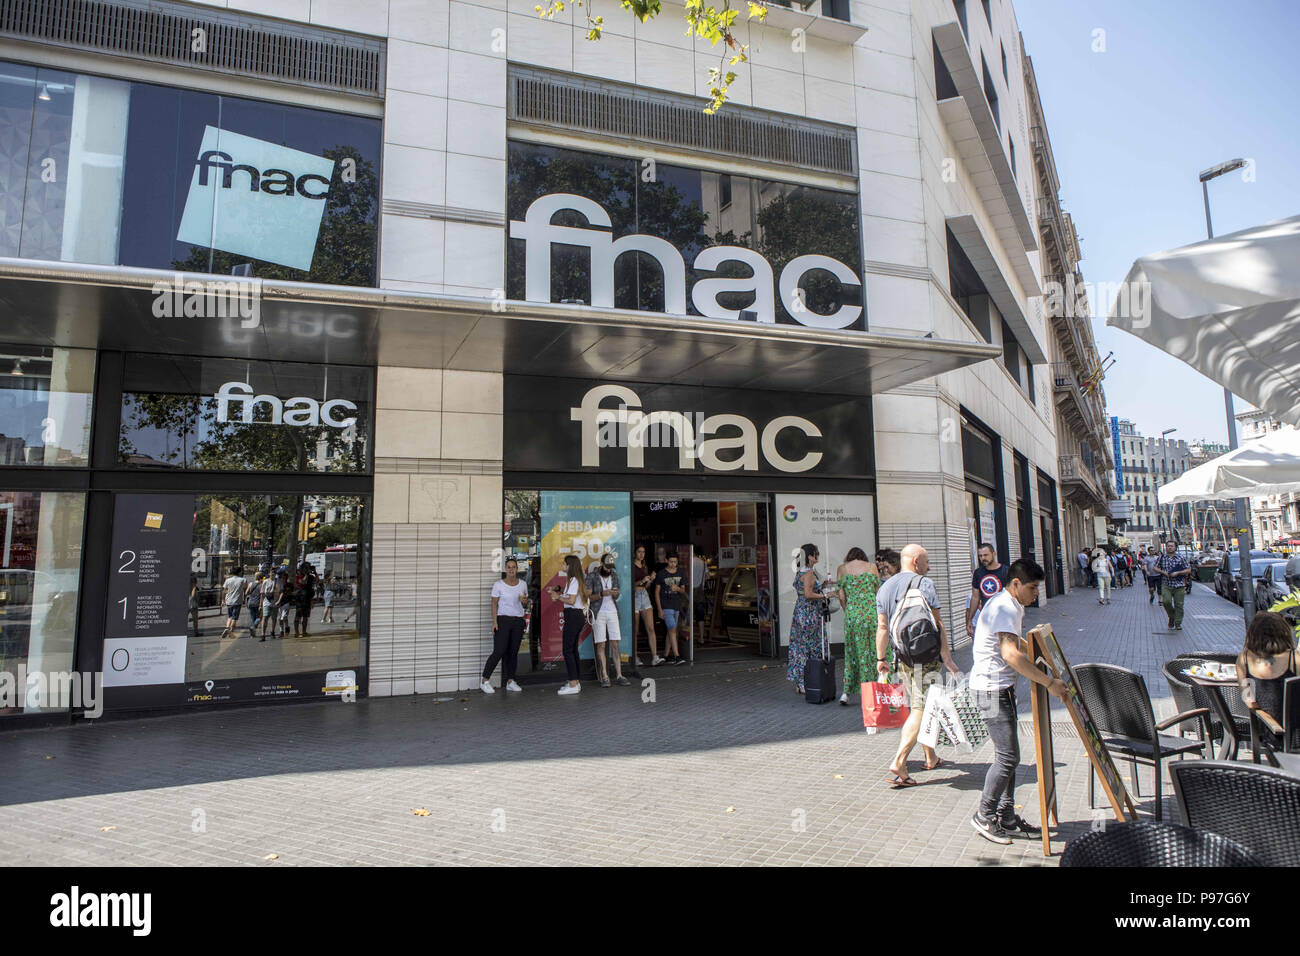 postura transatlántico Portavoz Barcelona, Barcelona, Spain. 12th July, 2018. Fnac shop on Passeig de GrÃ  cia street in Barcelona.Barcelona is a city in Spain. It is the capital and  largest city of Catalonia, as well